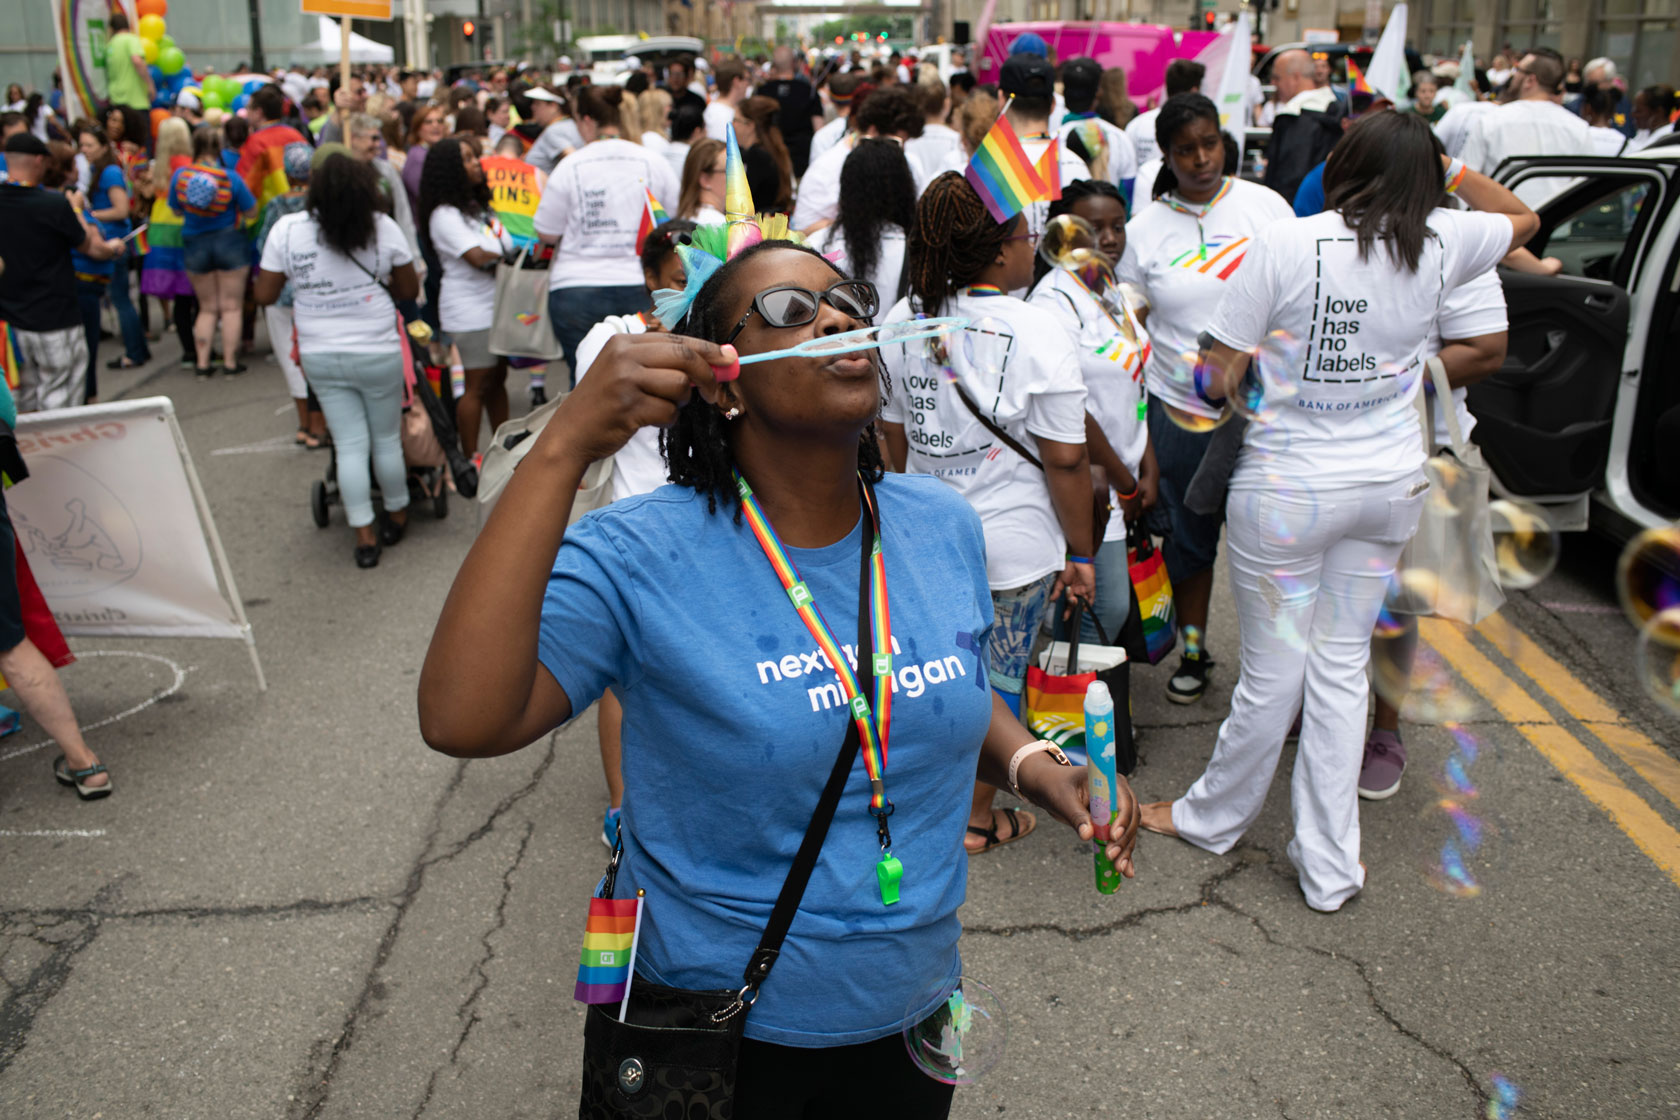 Workers prepare for the Motor City Pride parade.